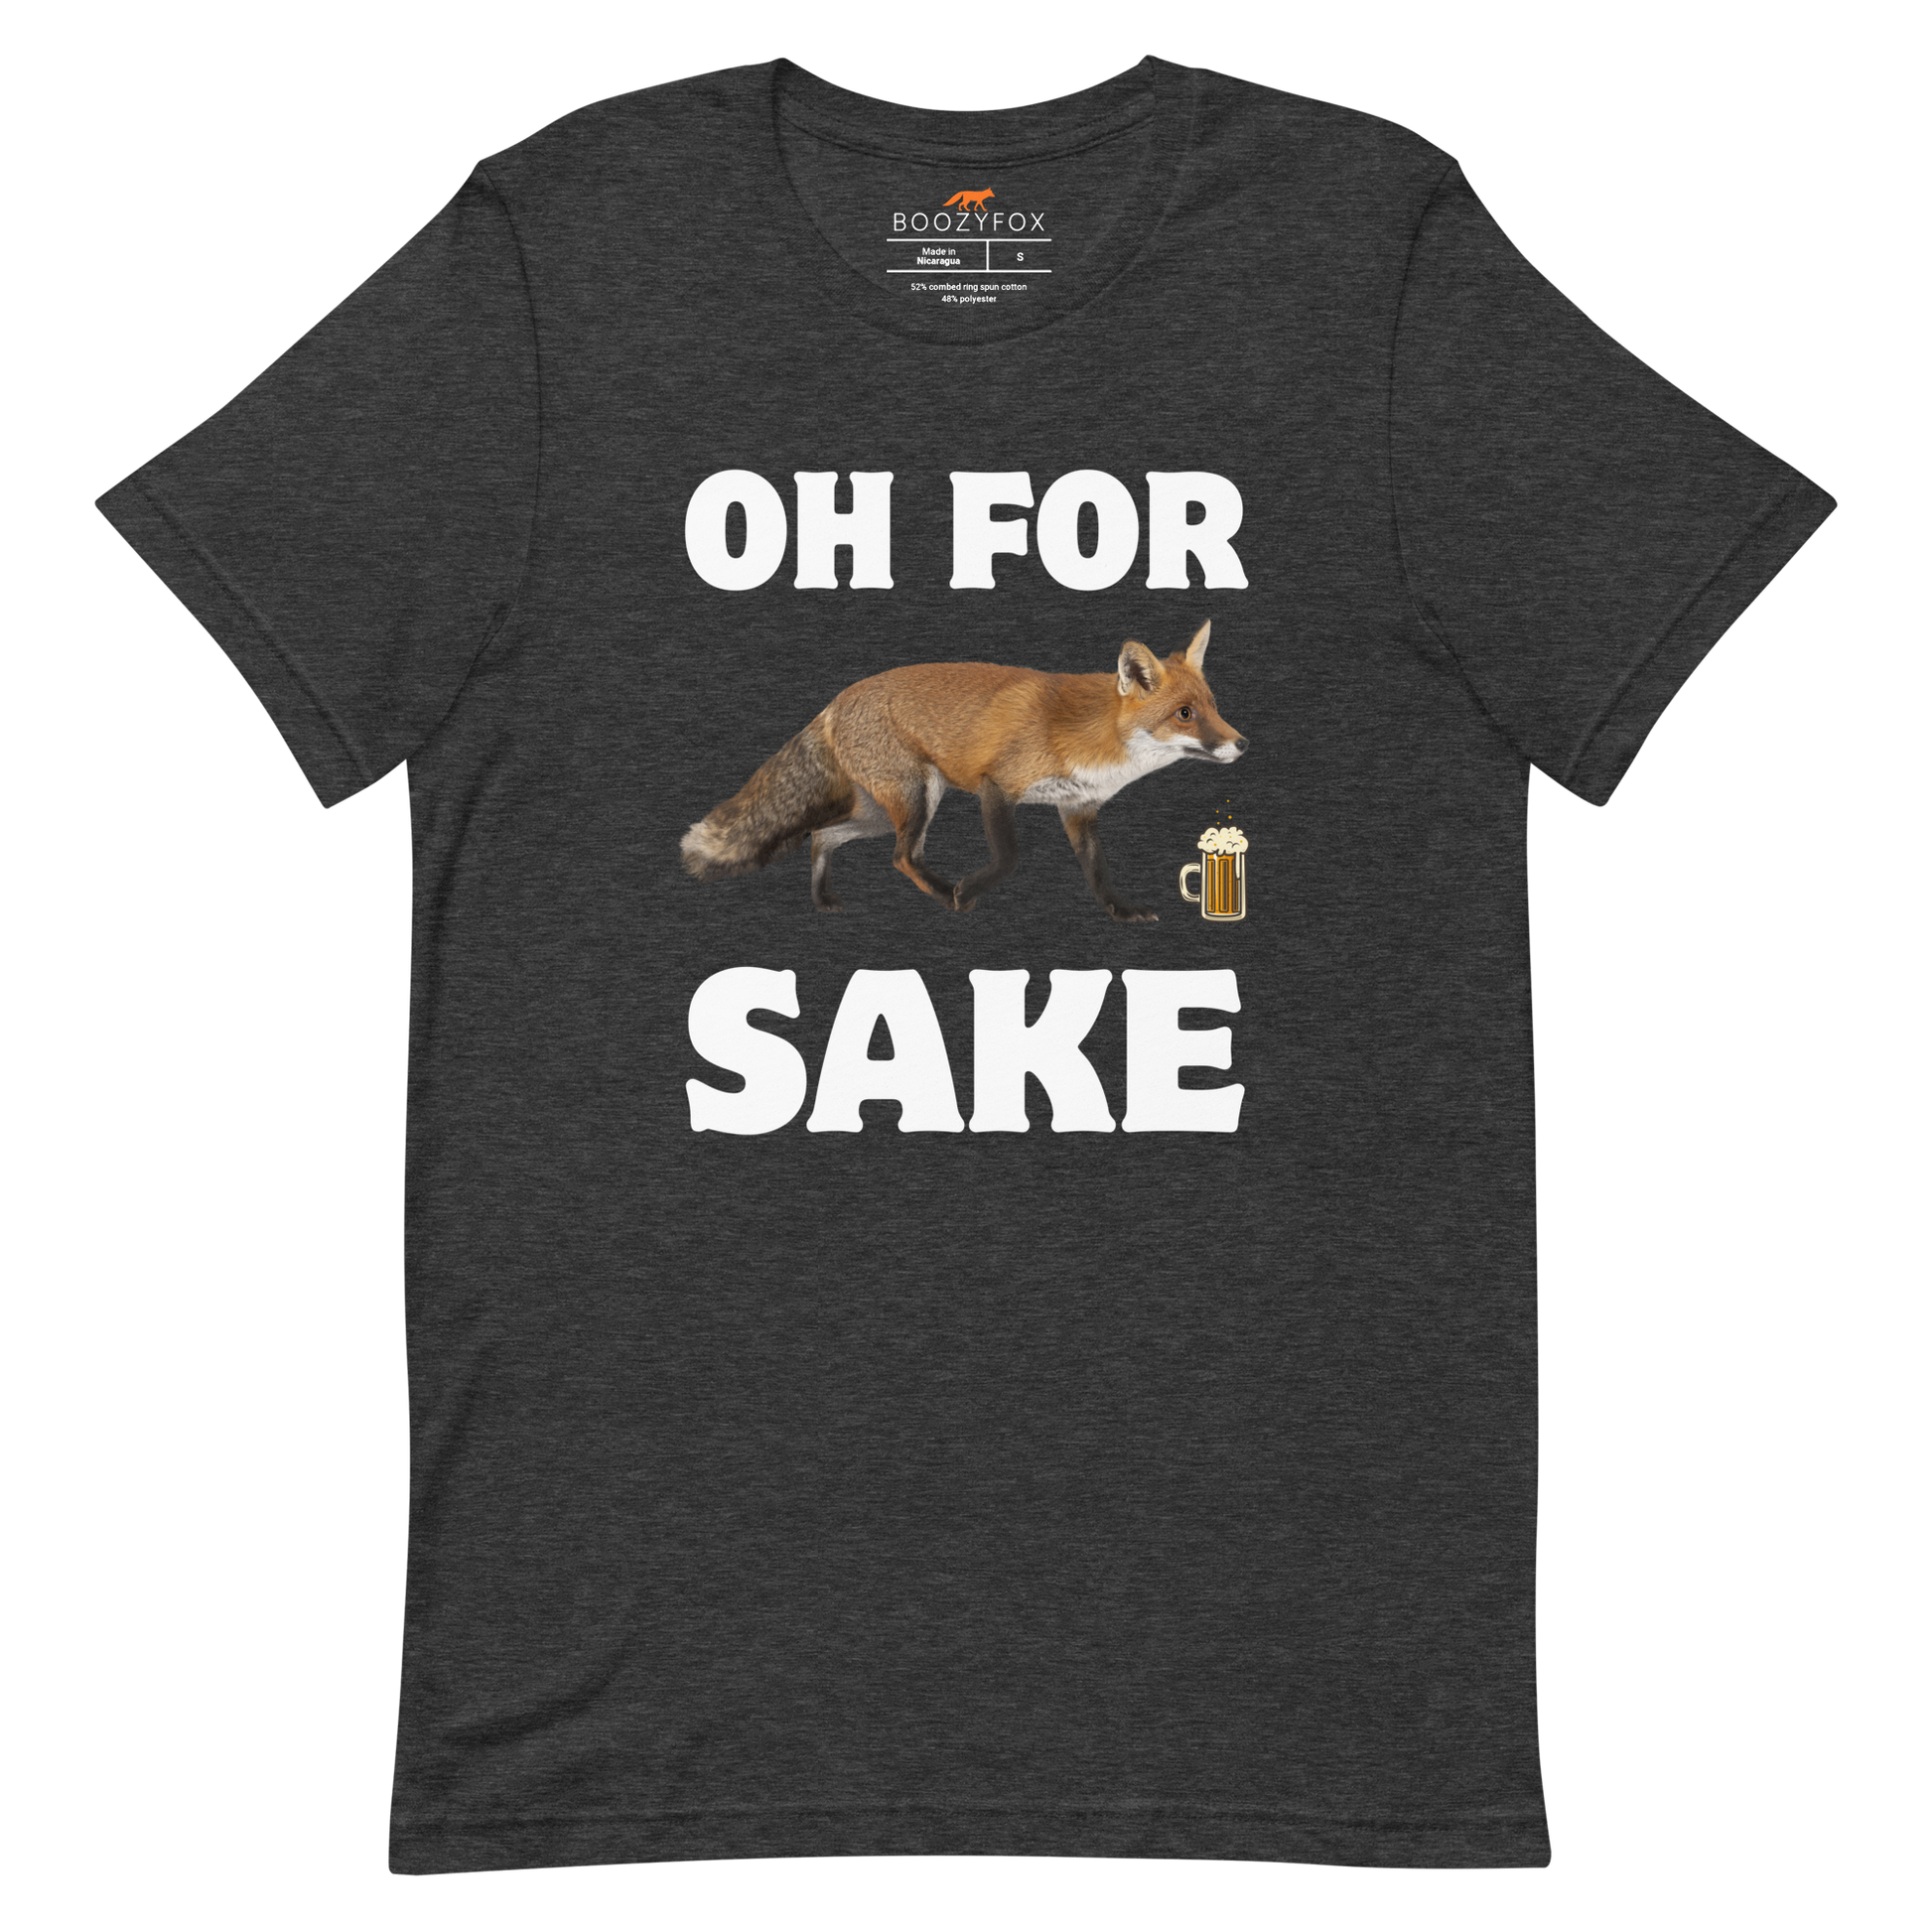 Dark Grey Heather Premium Fox T-Shirt featuring a Oh For Fox Sake graphic on the chest - Funny Graphic Fox Tees - Boozy Fox